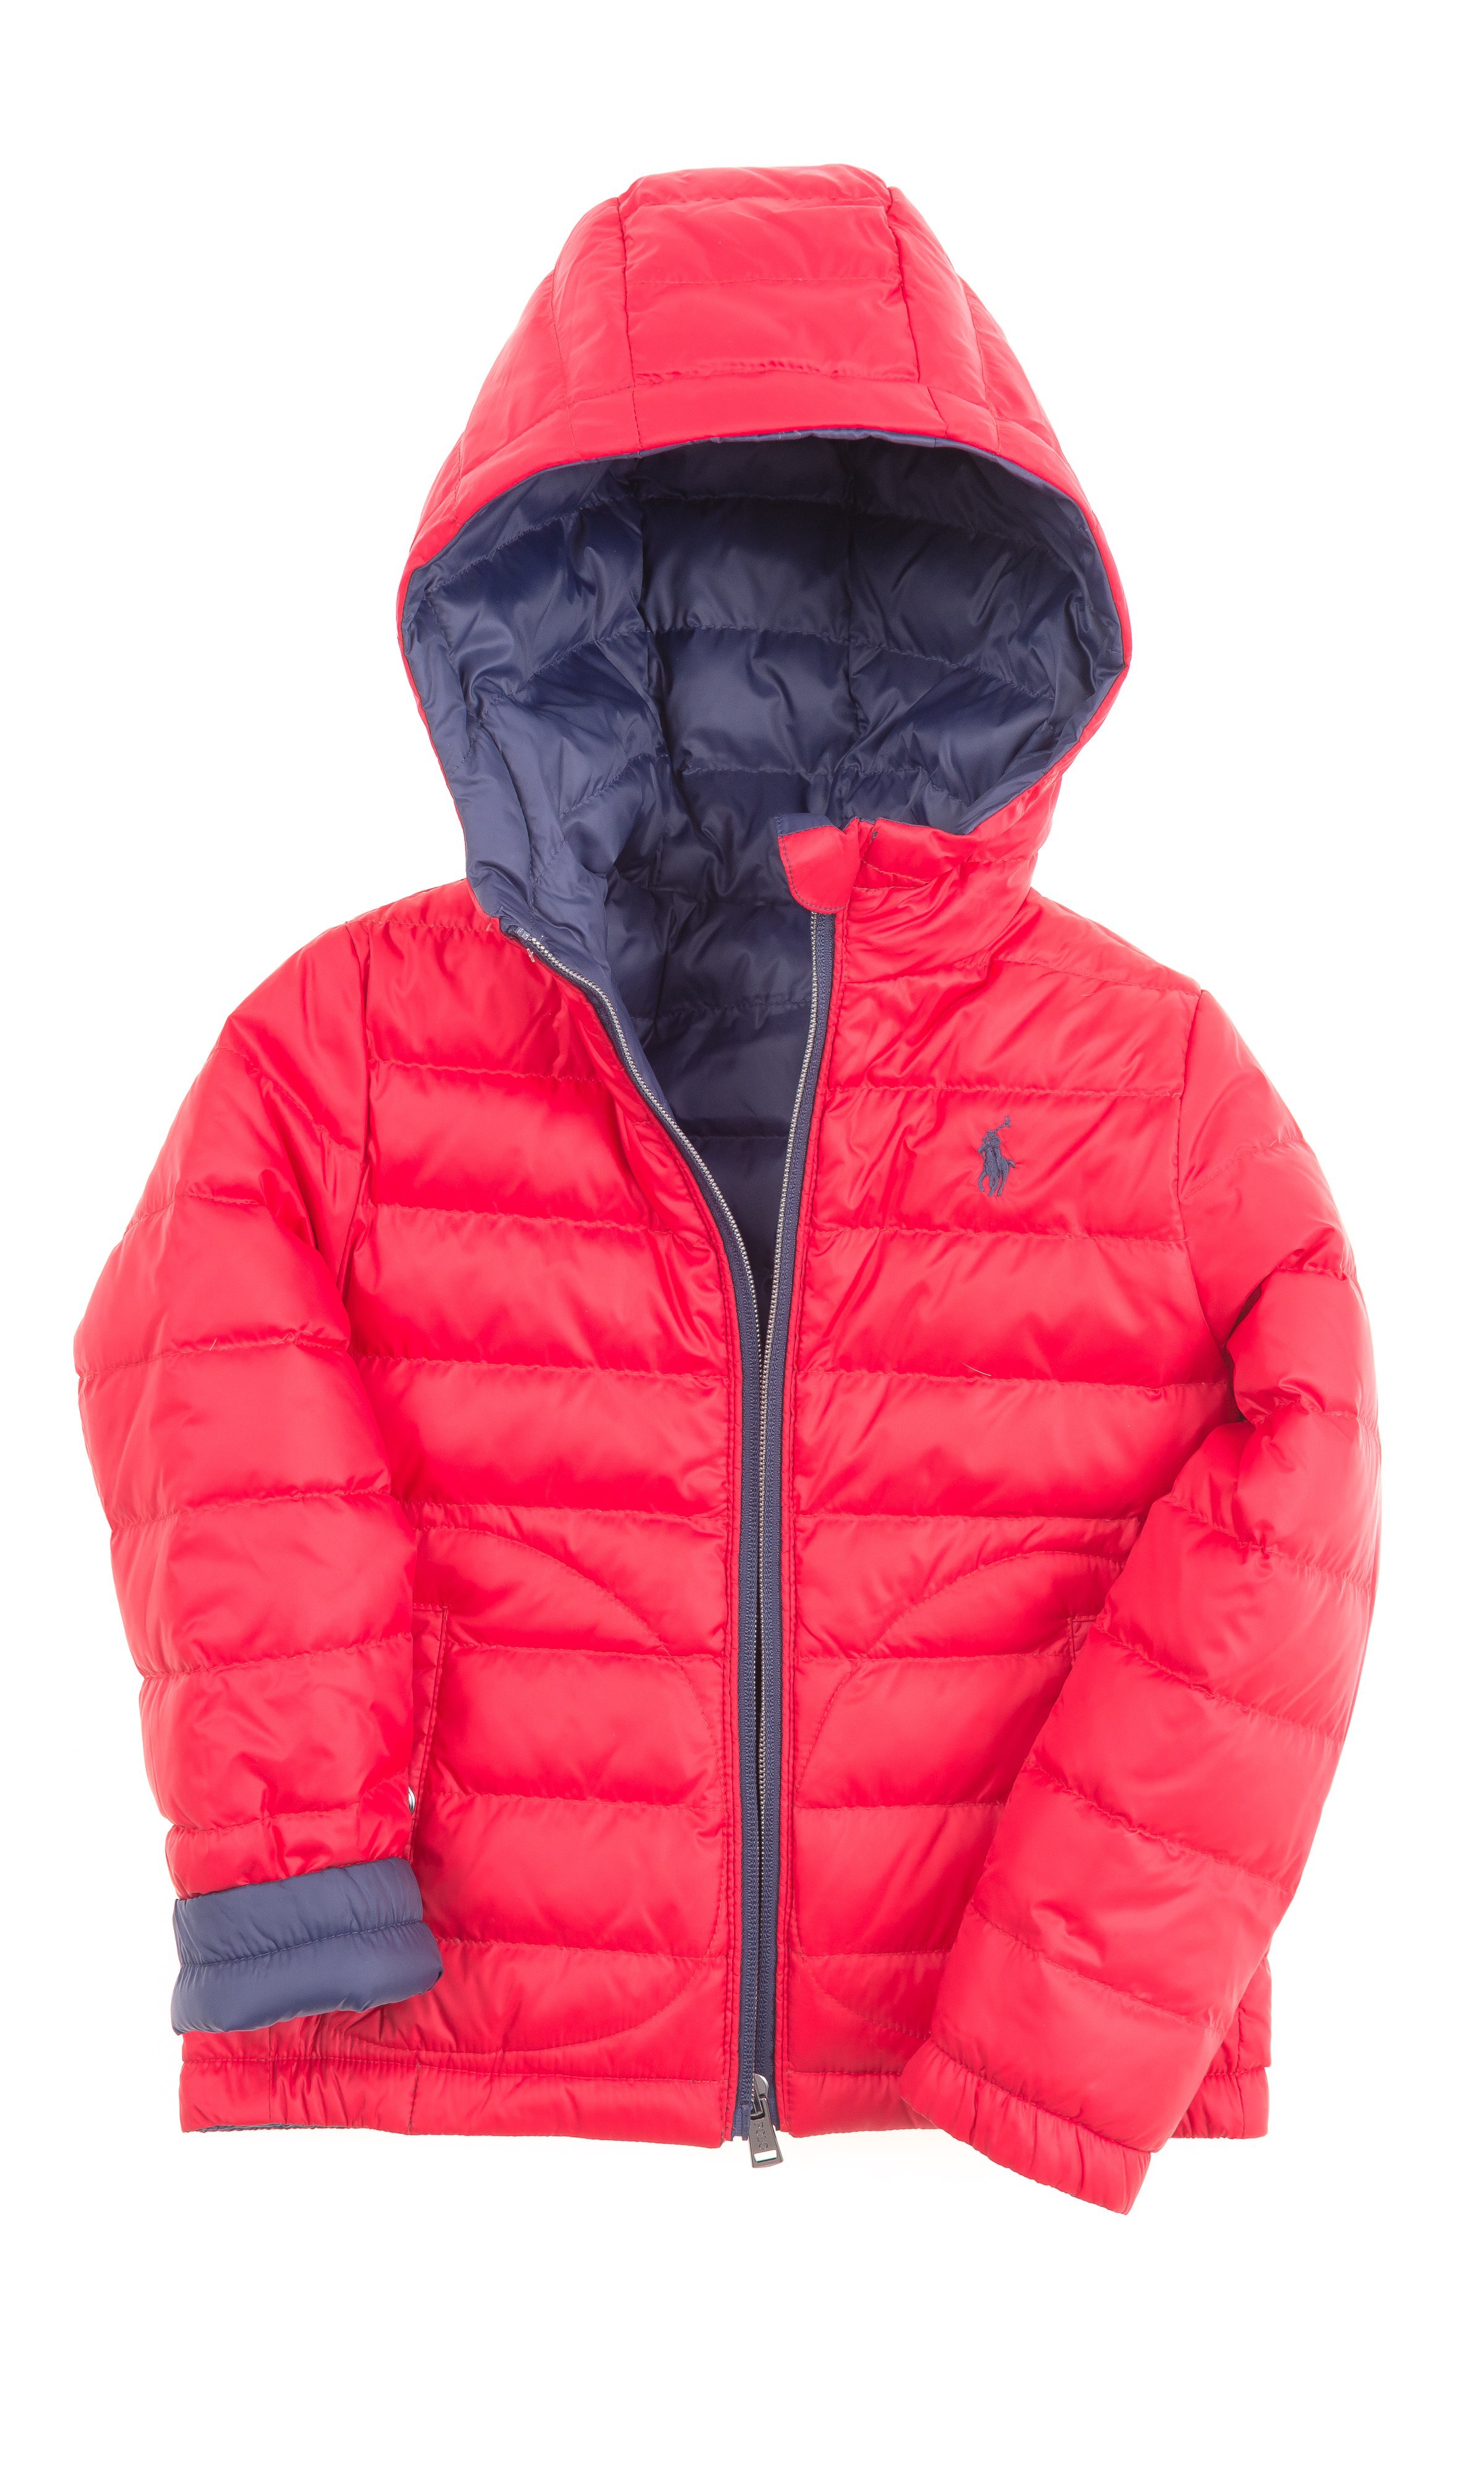 Double-sided red-and-navy-blue hooded jacket, Polo Ralph Lauren ...